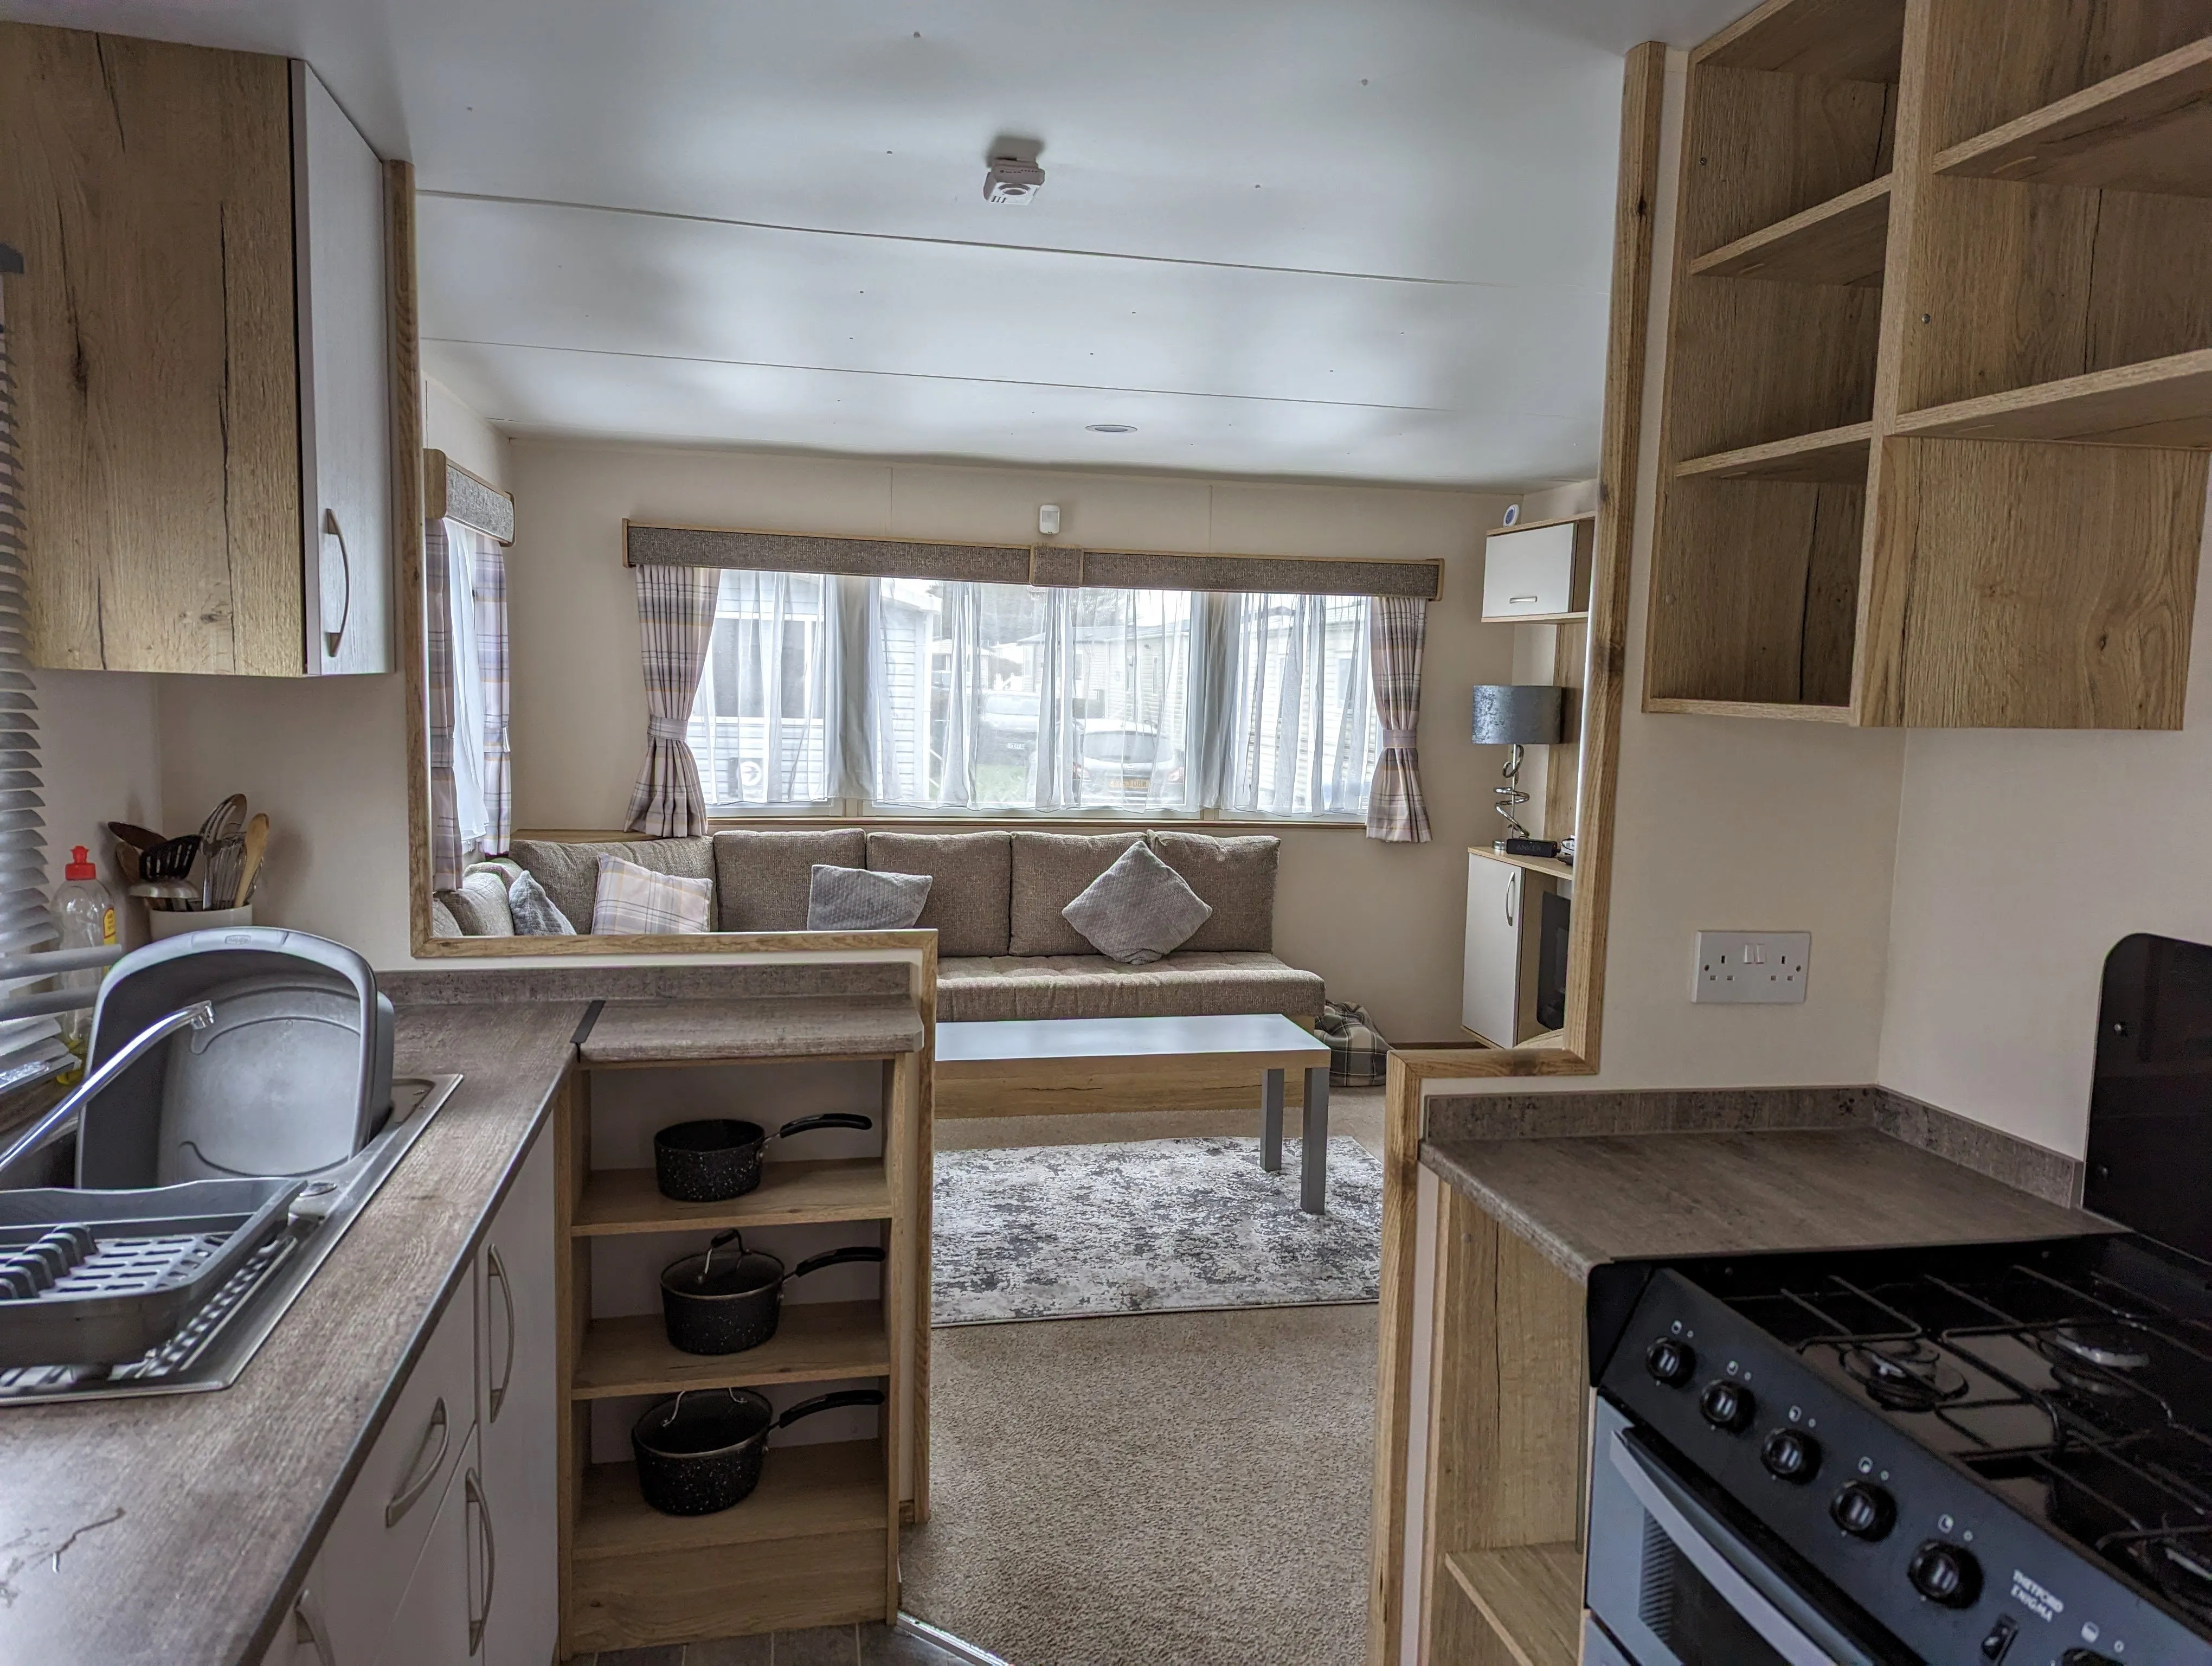 Spacious and modern caravan interior with comfortable seating, dining area, and fully-equipped kitchen